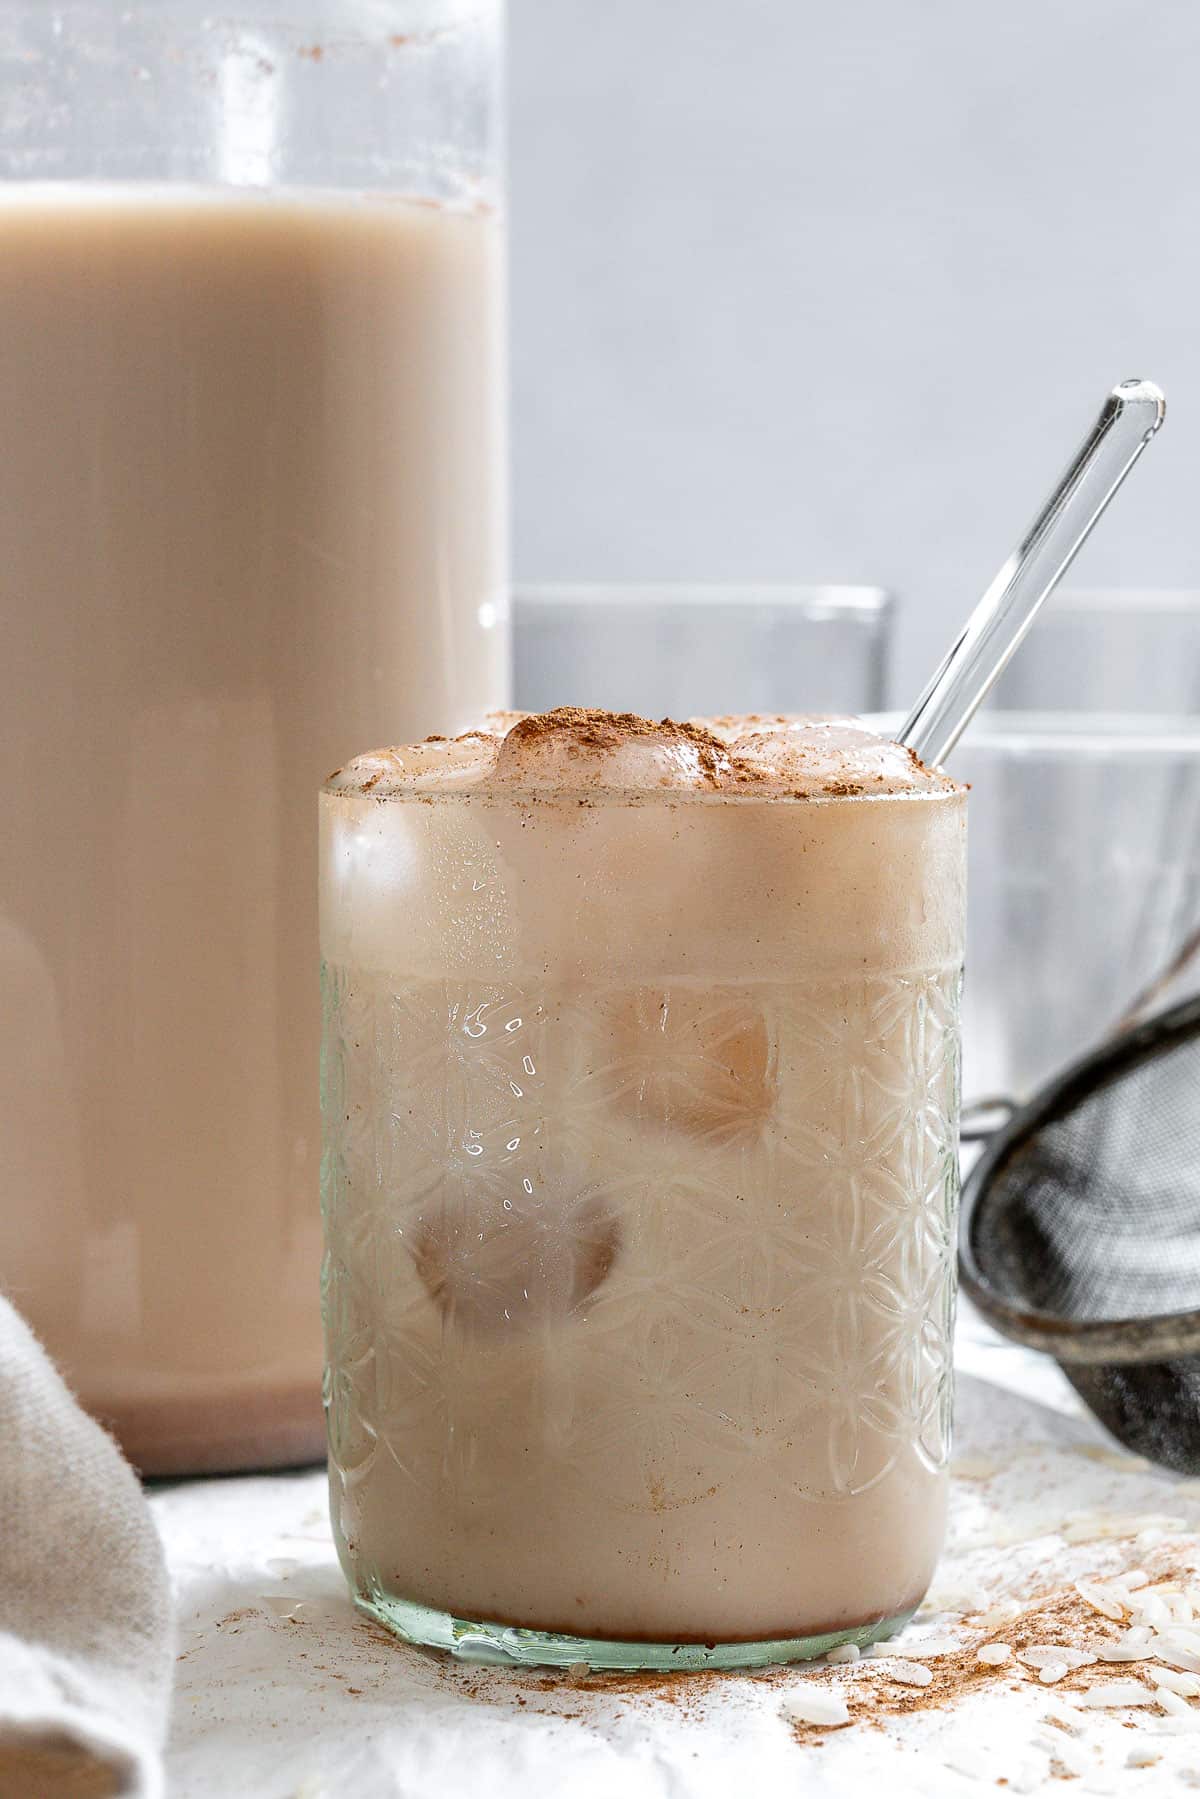 completed Mexican Horchata Recipe a،nst a white background